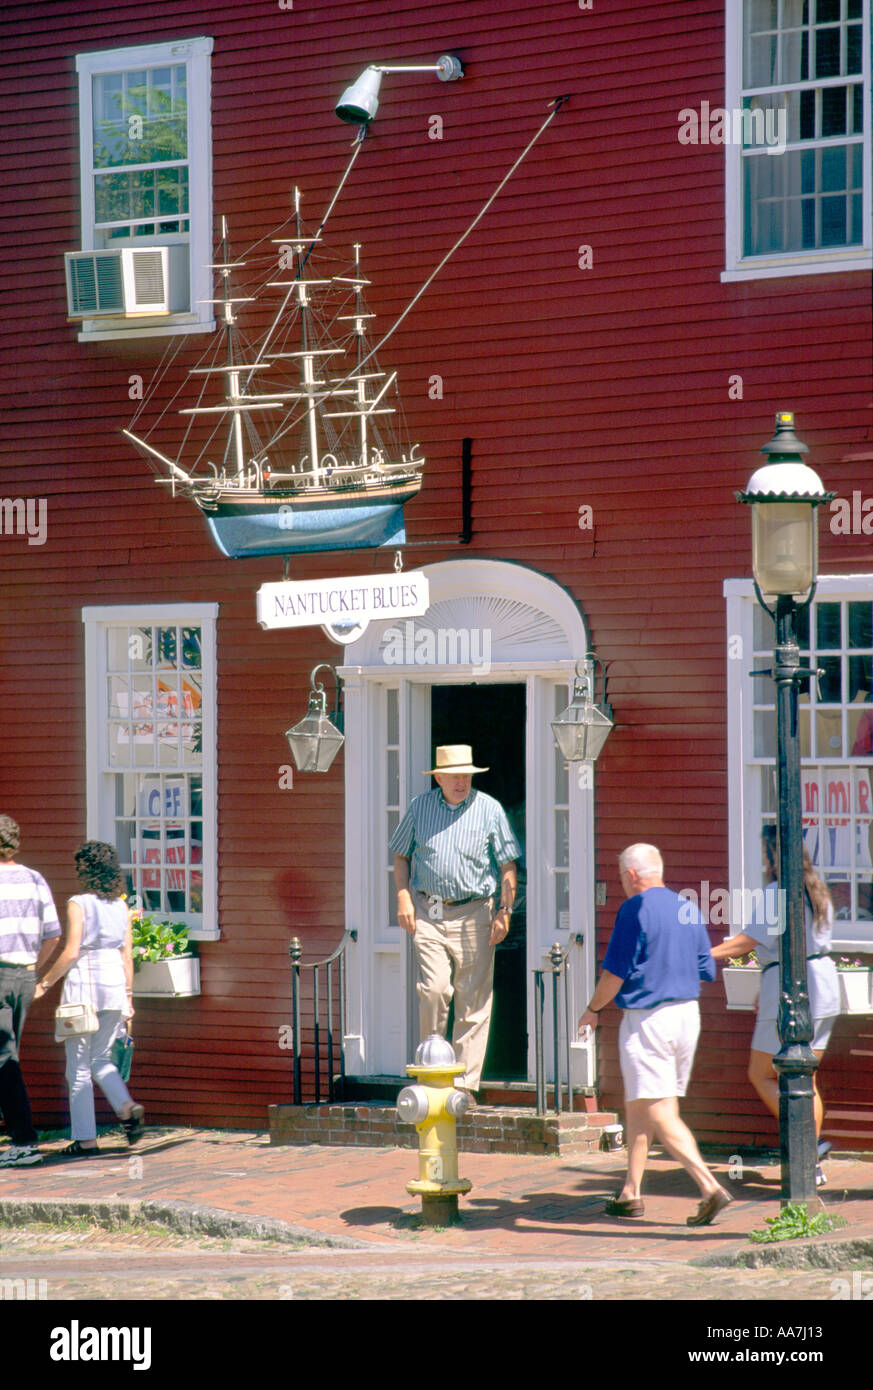 Nantucket town on Nantucket Island off Cape Cod, Massachusetts, USA. Shop boutique on Main Street with model whaling boat Stock Photo